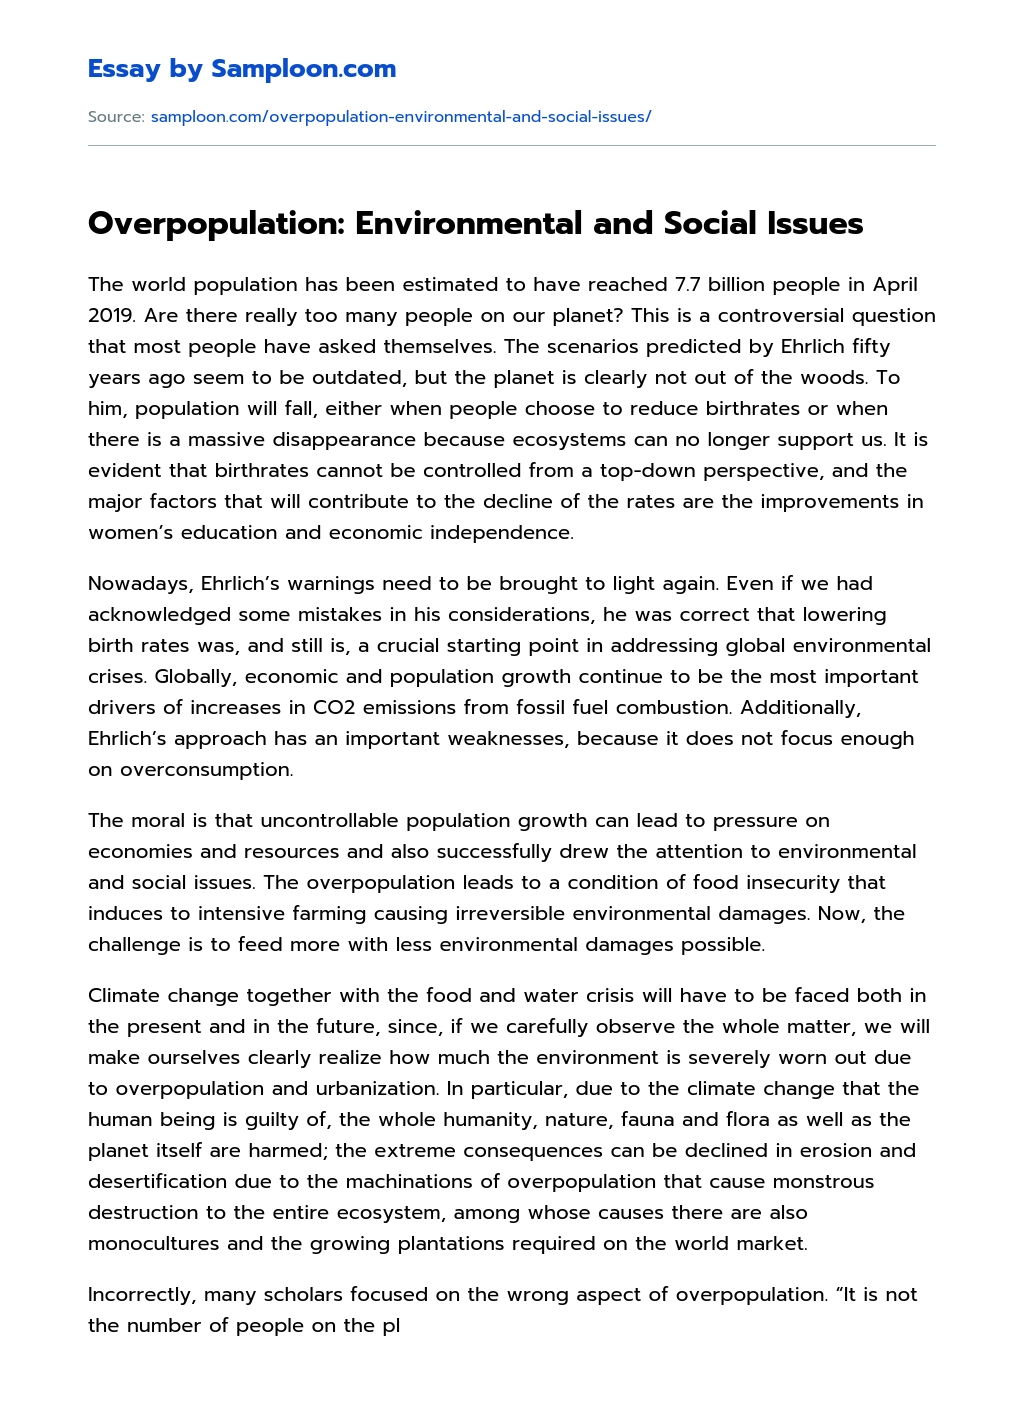 Overpopulation: Environmental and Social Issues essay